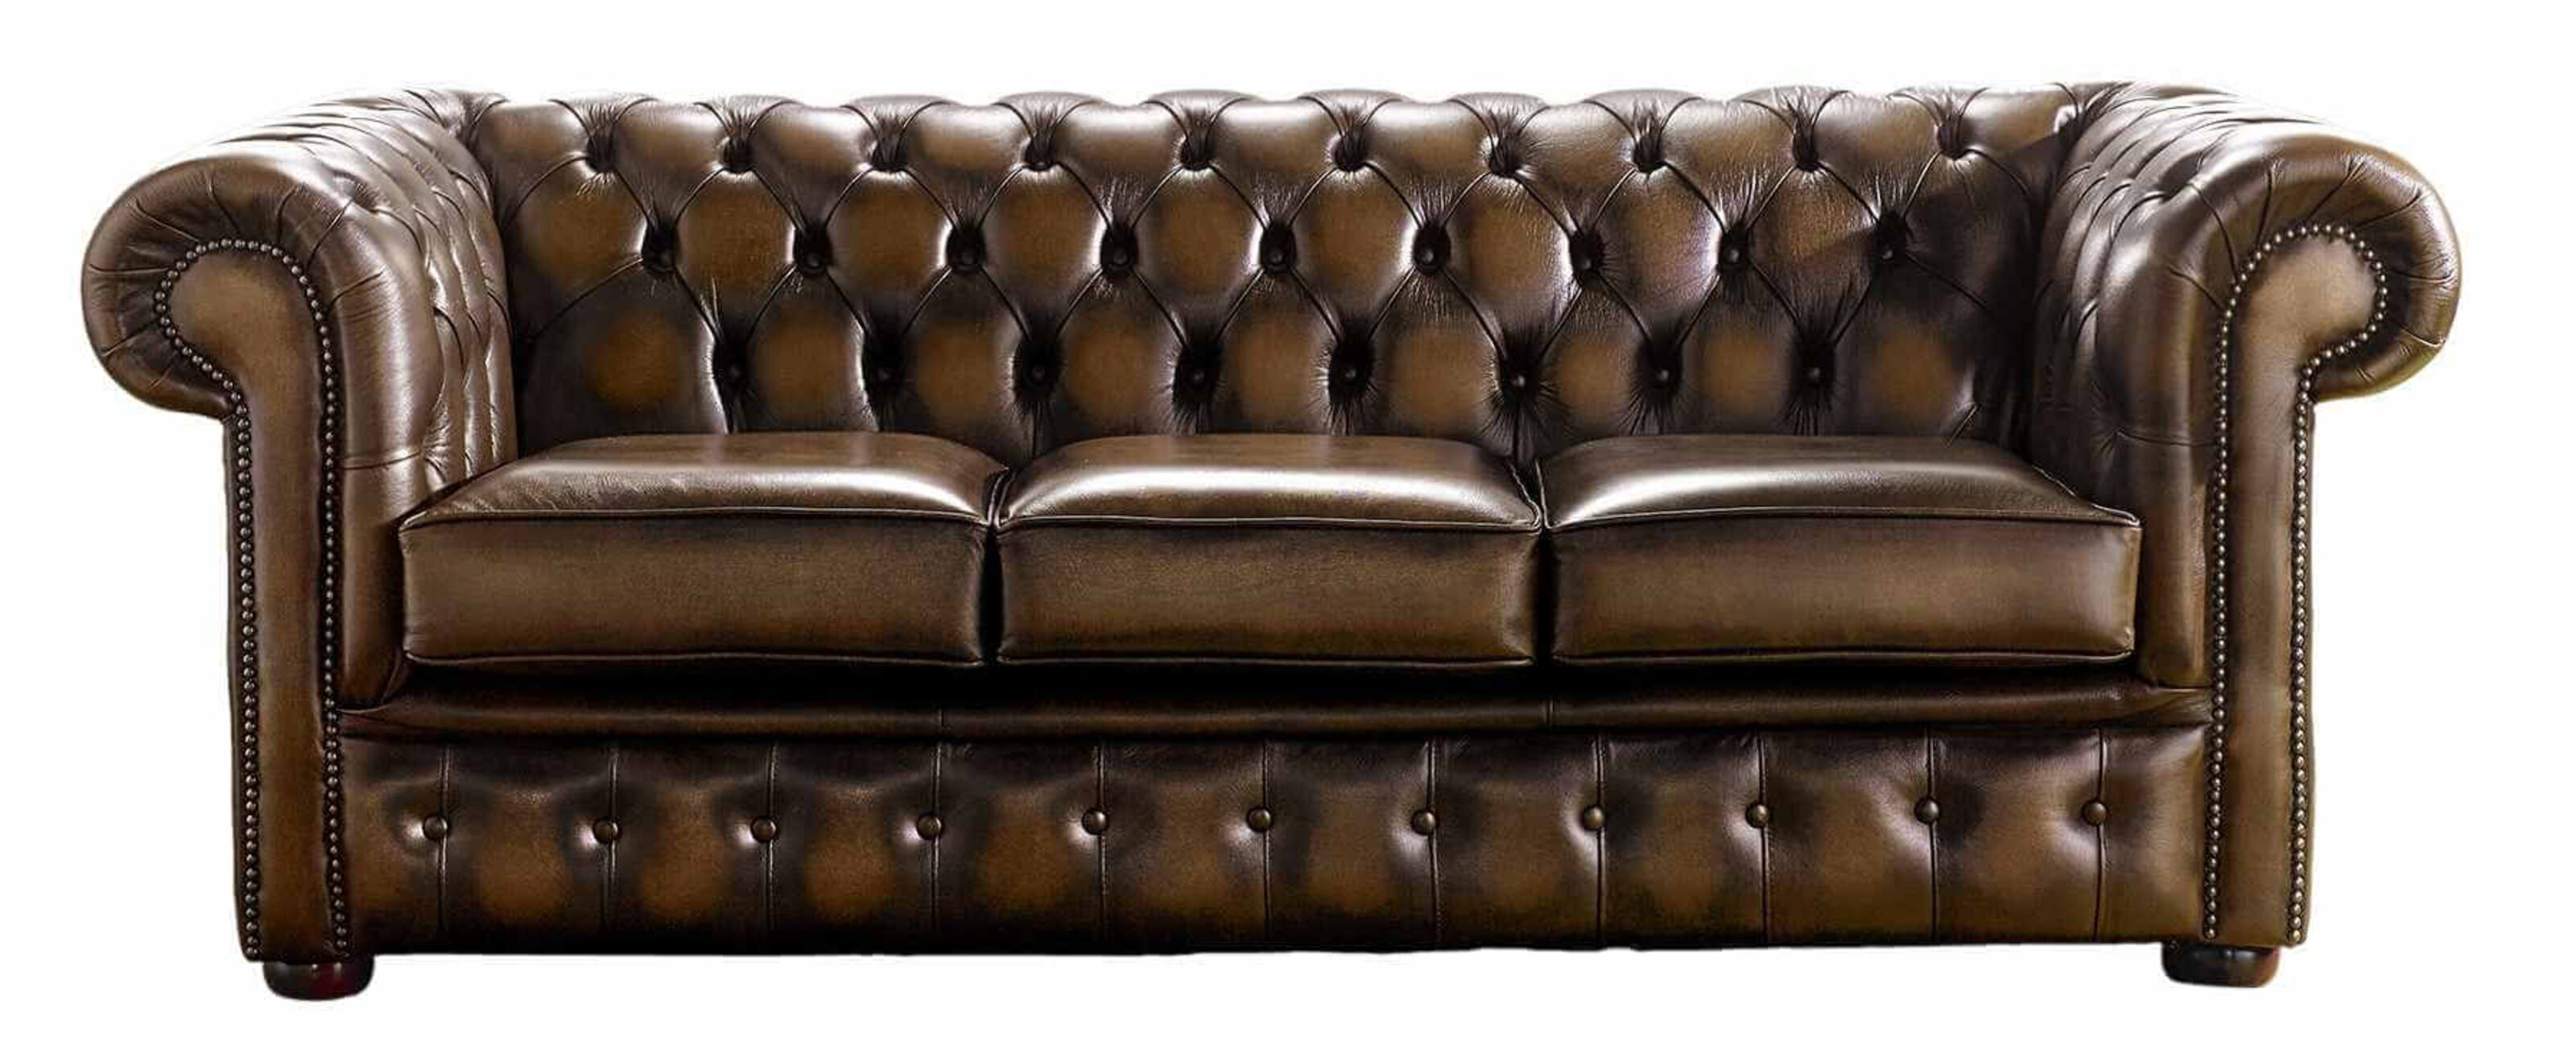 Distinguishing Chesterfield from Couch A Comparative Analysis  %Post Title